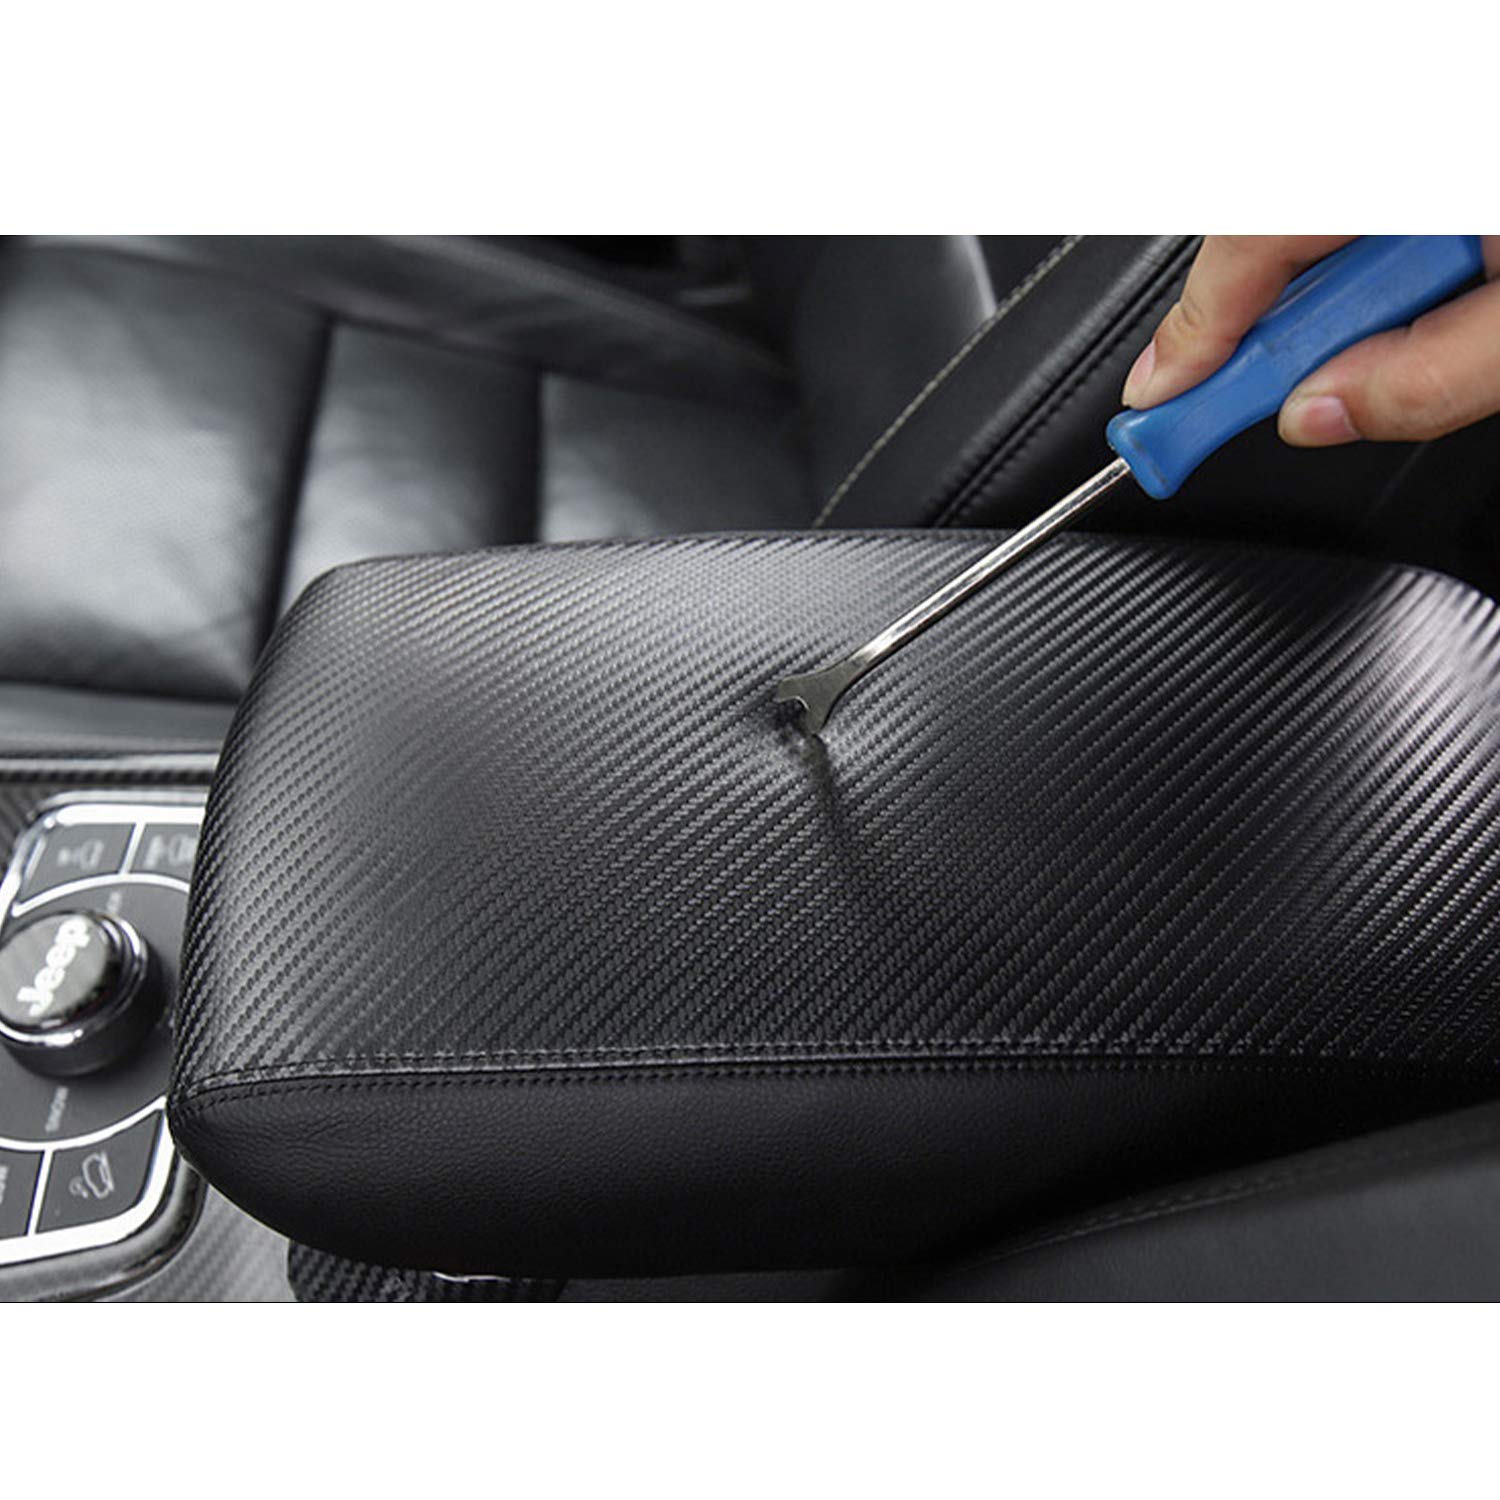 Jeep Grand Cherokee Armrest Cover 2011+ - LFOTPP Car Accessories